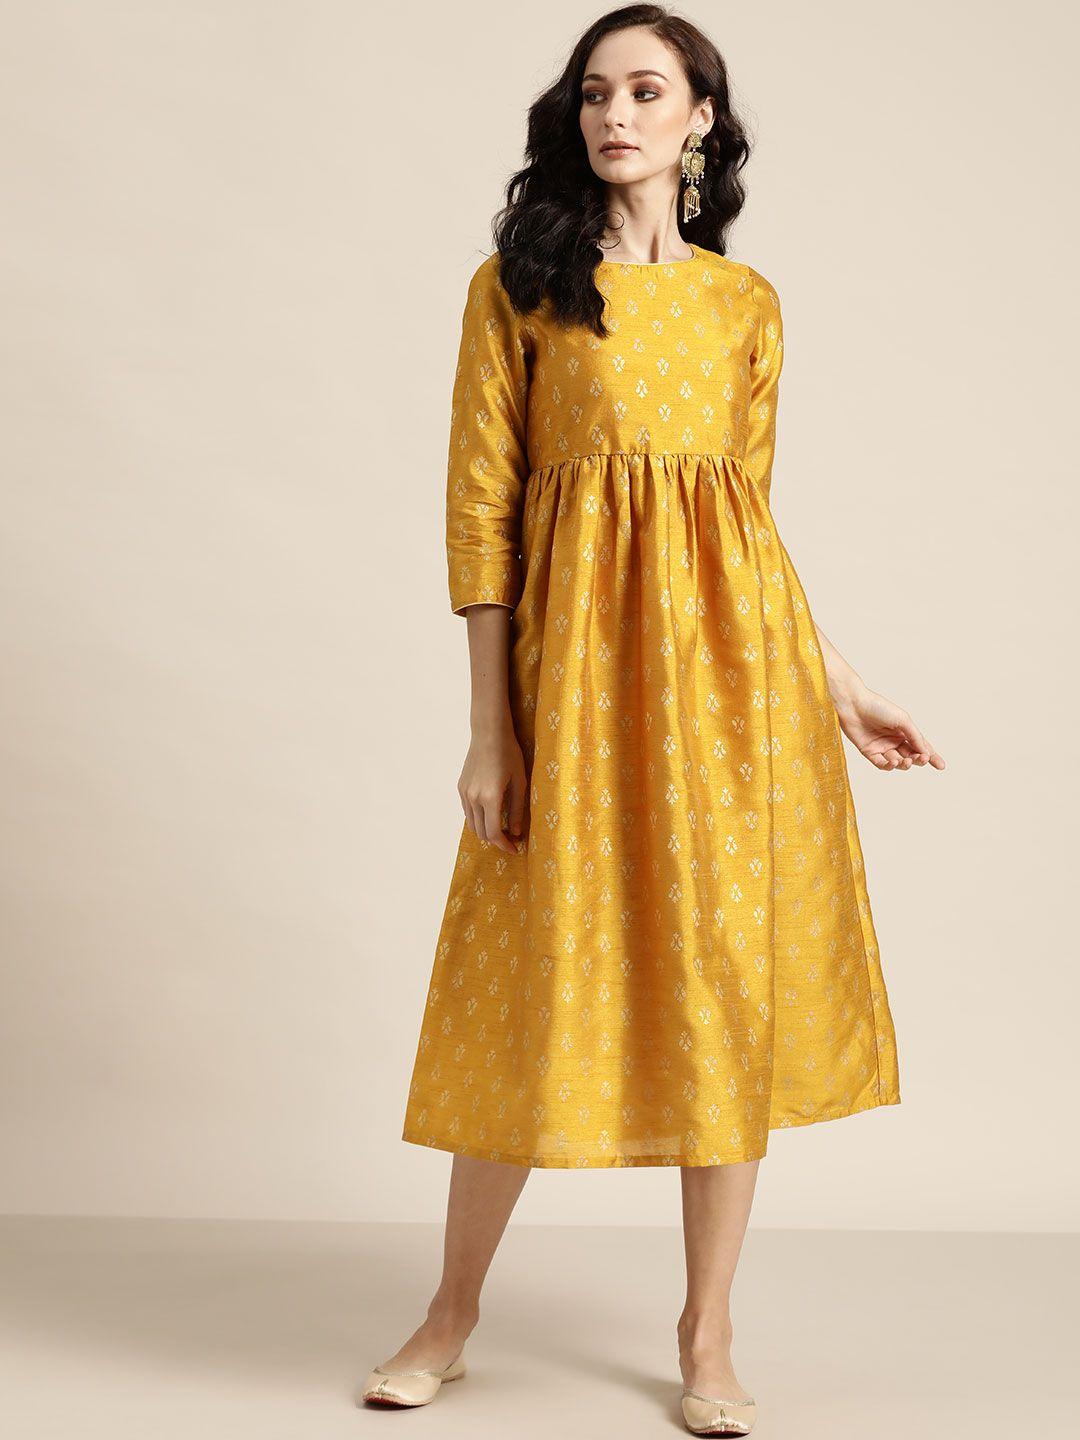 shae by sassafras mustard yellow & off white floral a-line midi dress